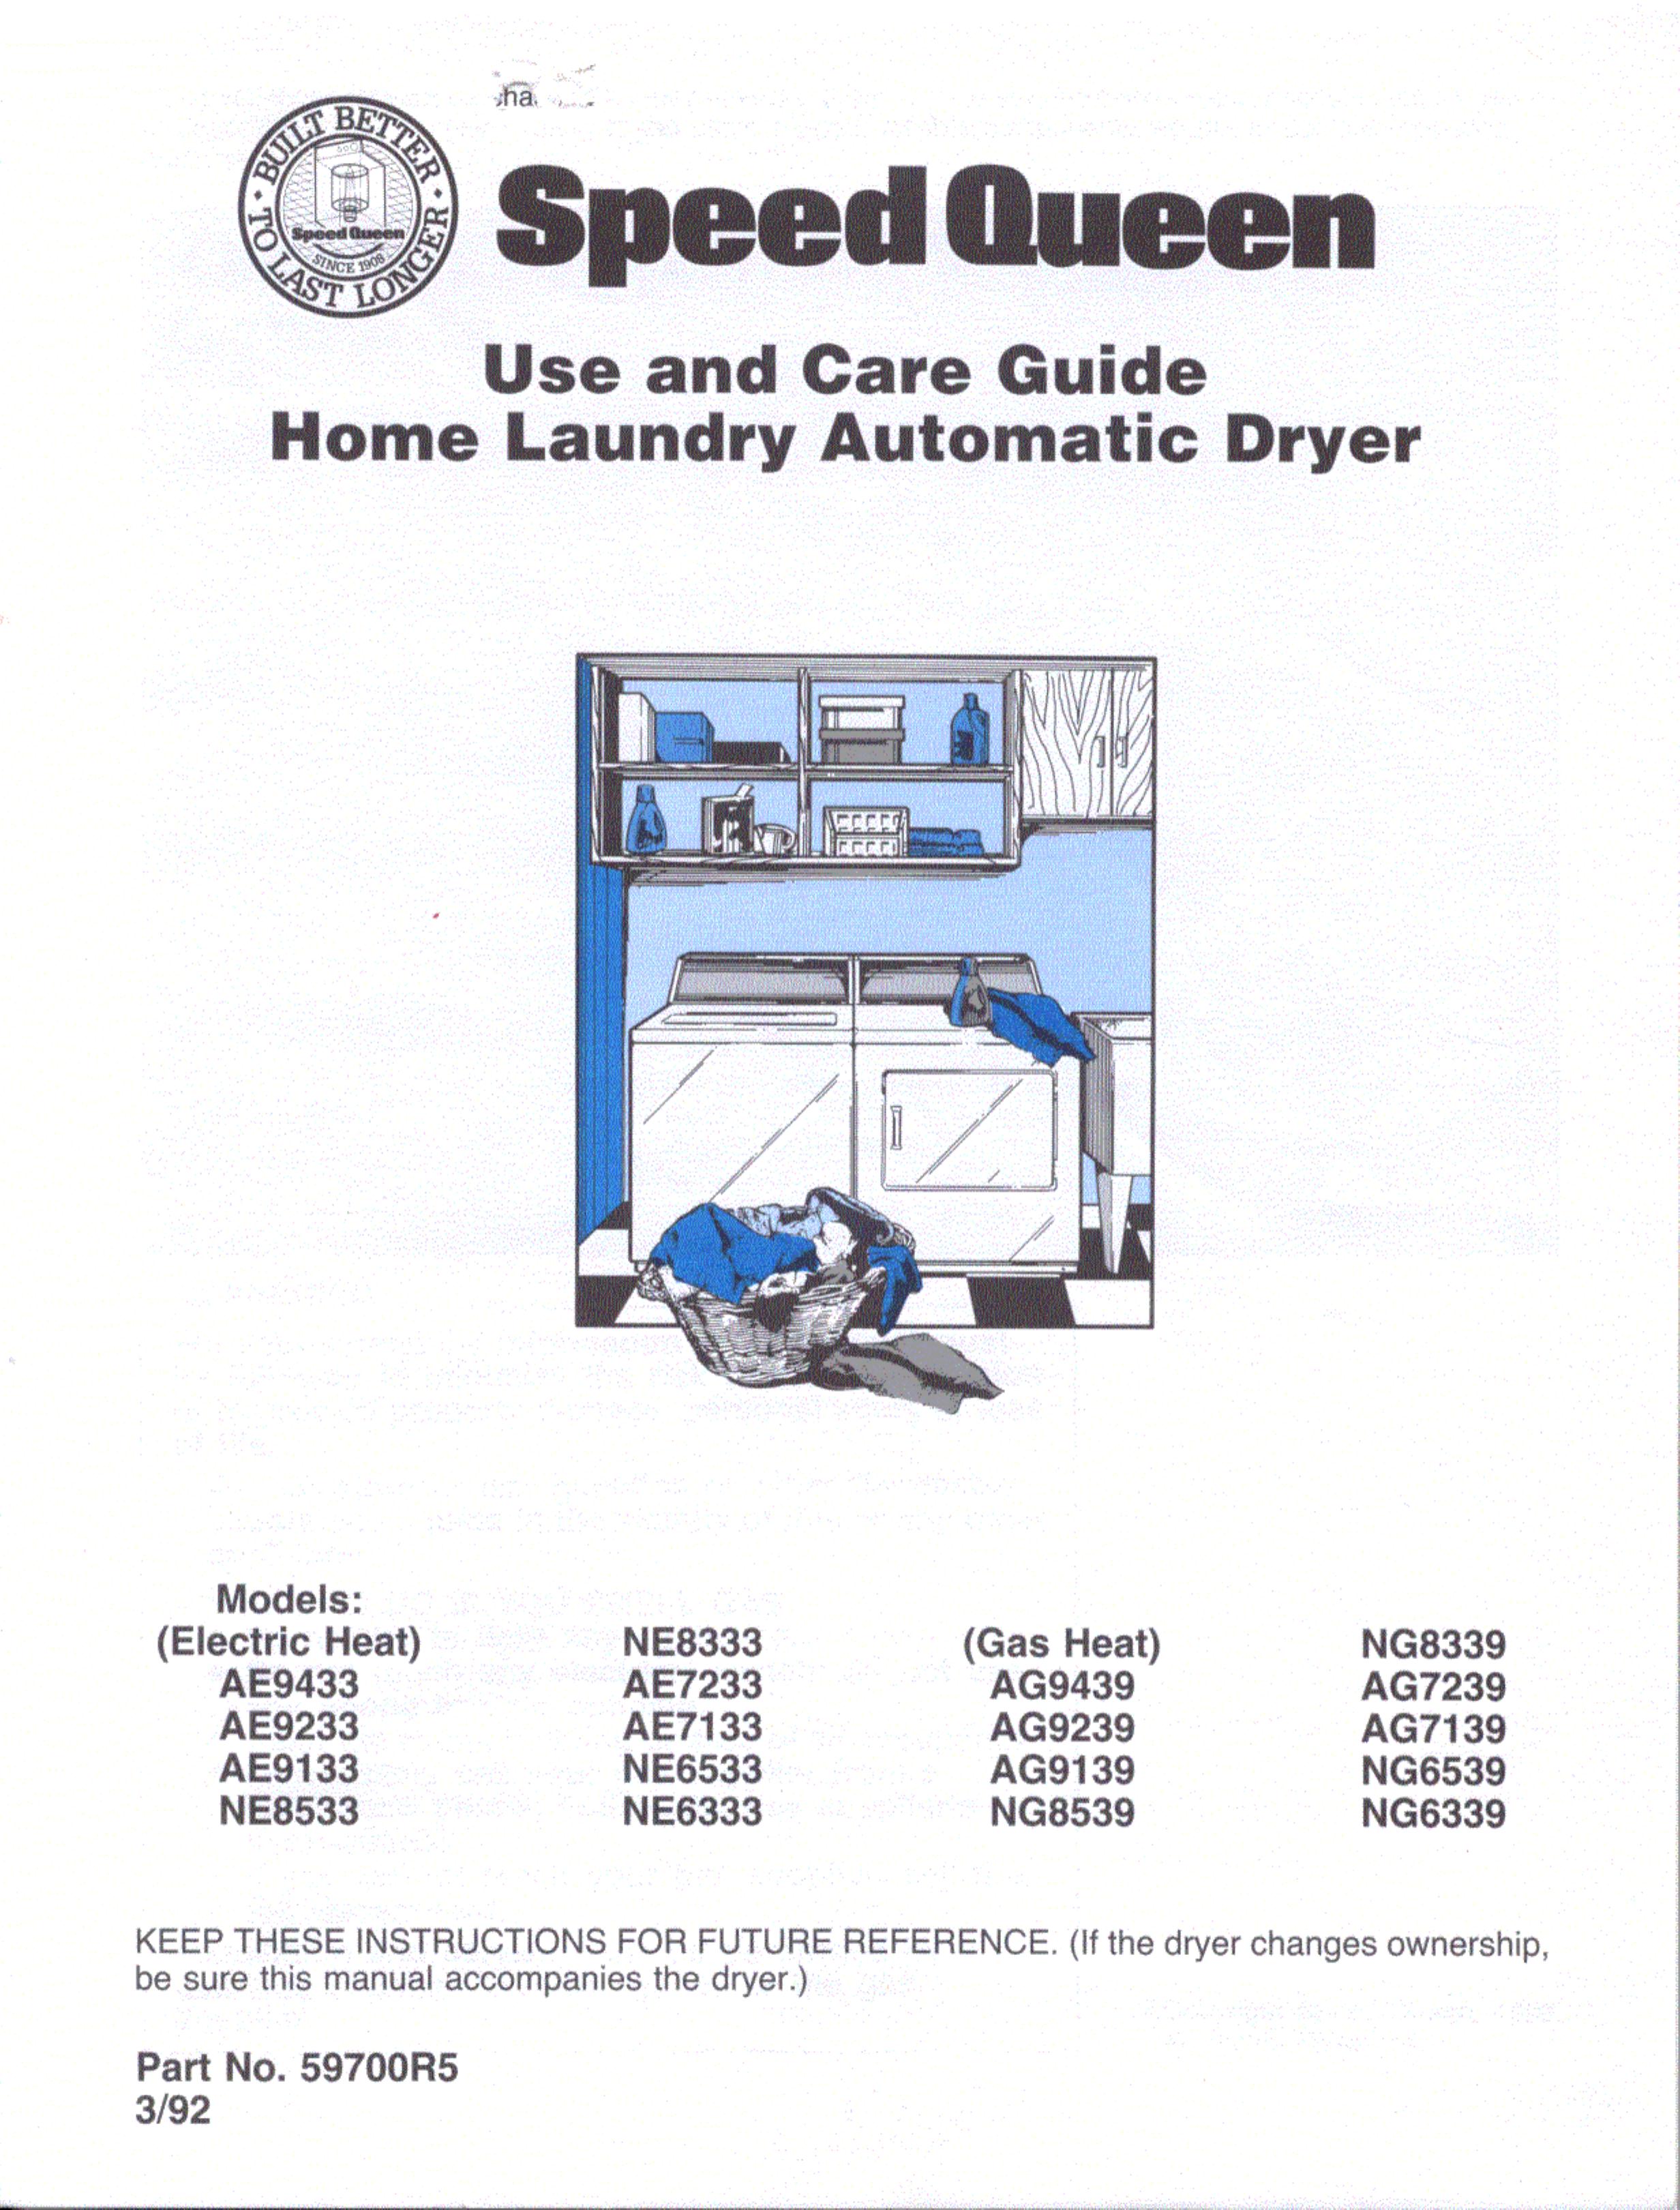 Speed Queen AE9133 Clothes Dryer User Manual